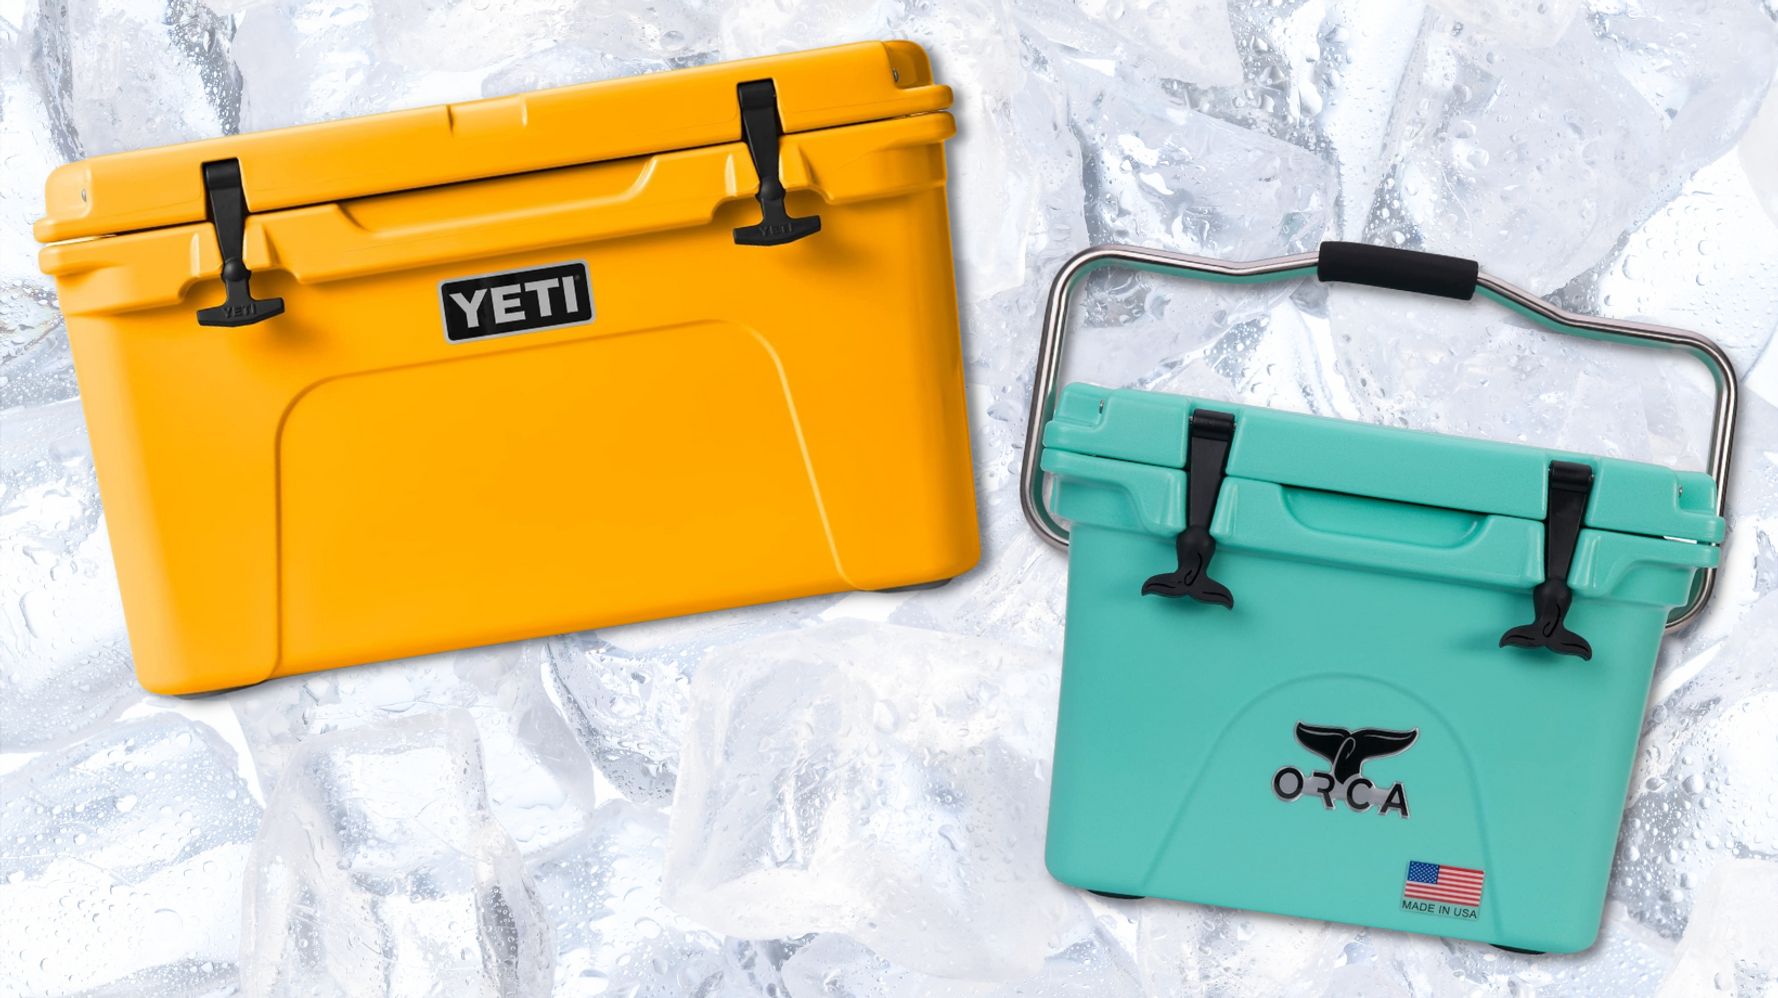 Yeti Tundra 35: My favorite cooler of all time!